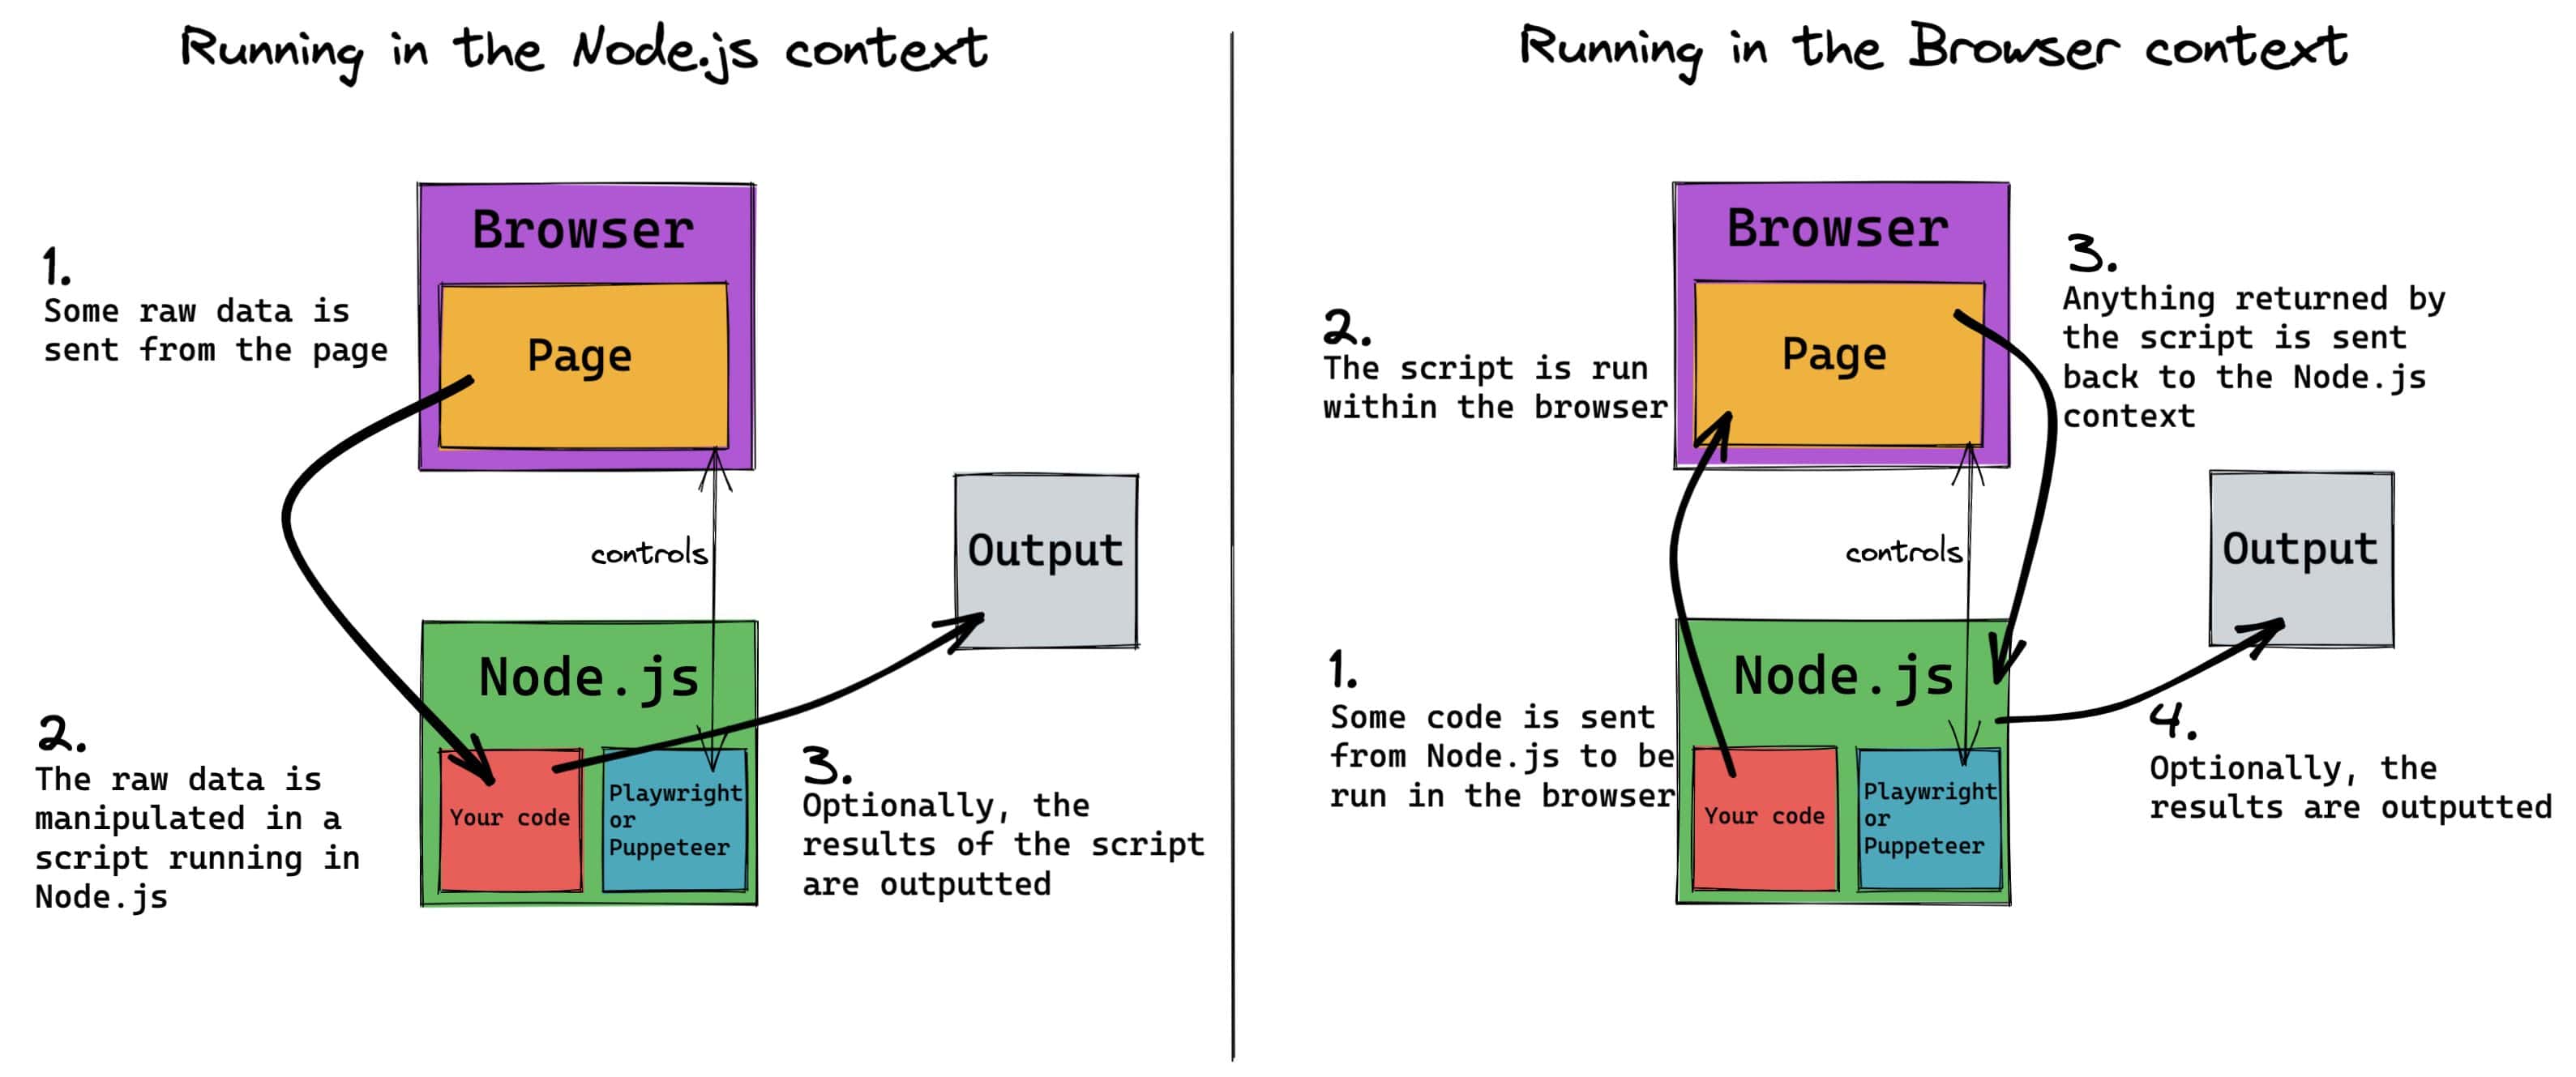 Diagram explaining the two different contexts your code can be run in